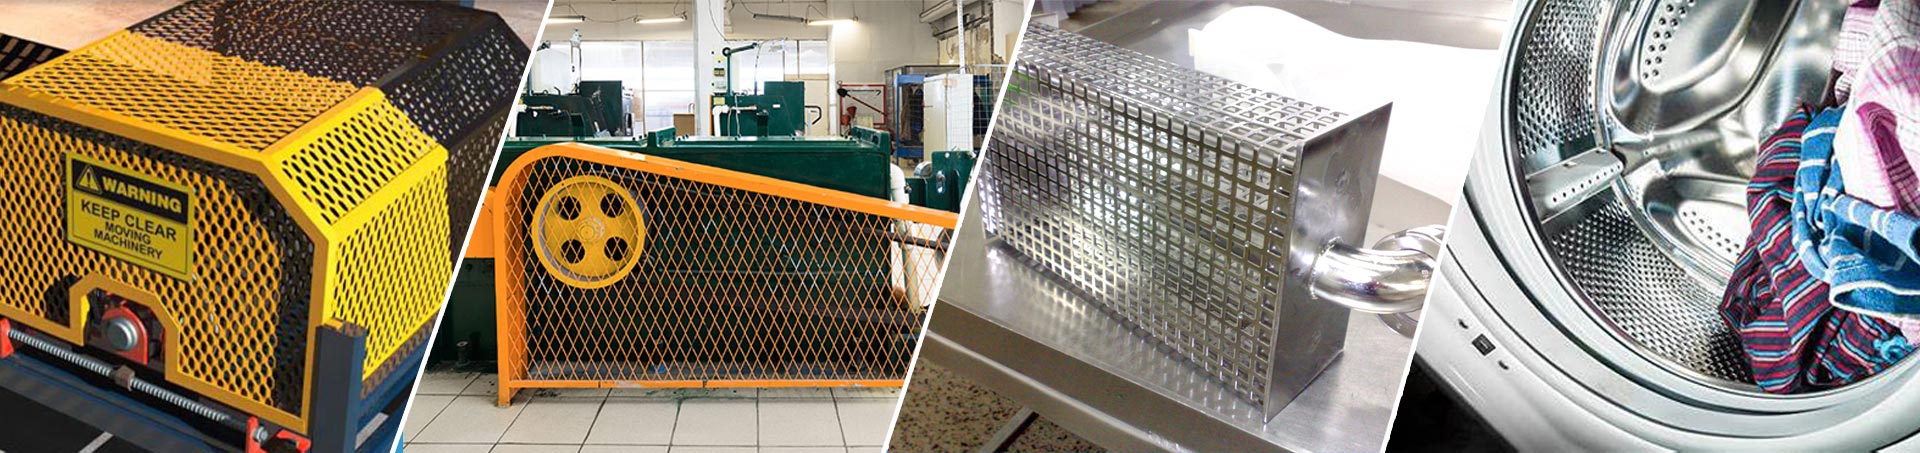 Machinery and Manufacturing Mesh